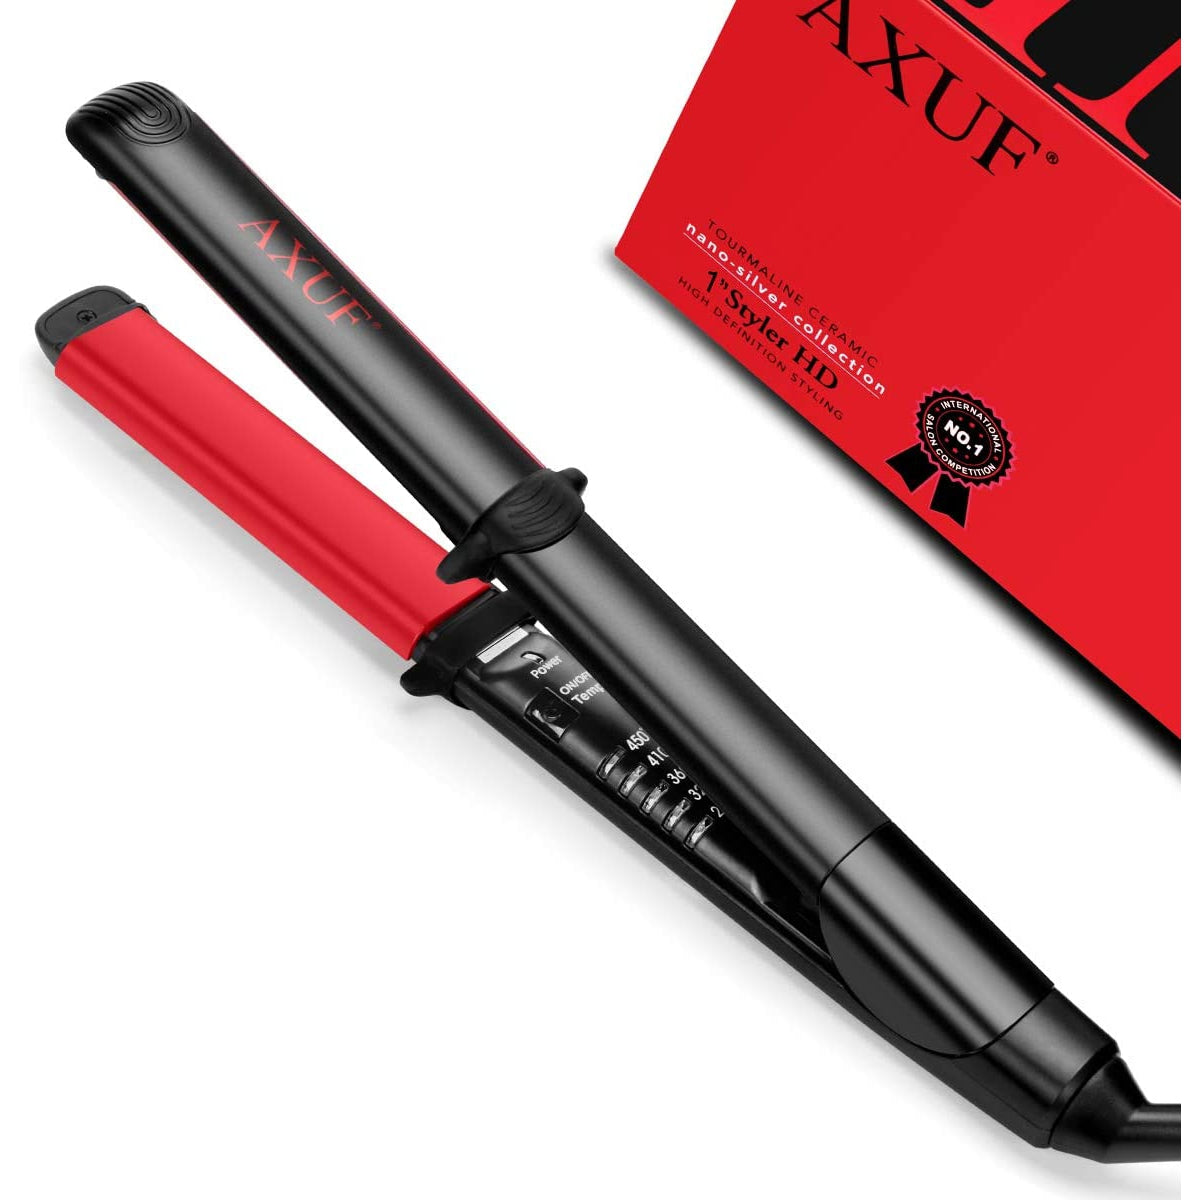 Axuf 2 in 1 Professional Hair Straightener and Curler in Titanium Ceramic Nano Tourmaline Flat Iron and For All Hair Types